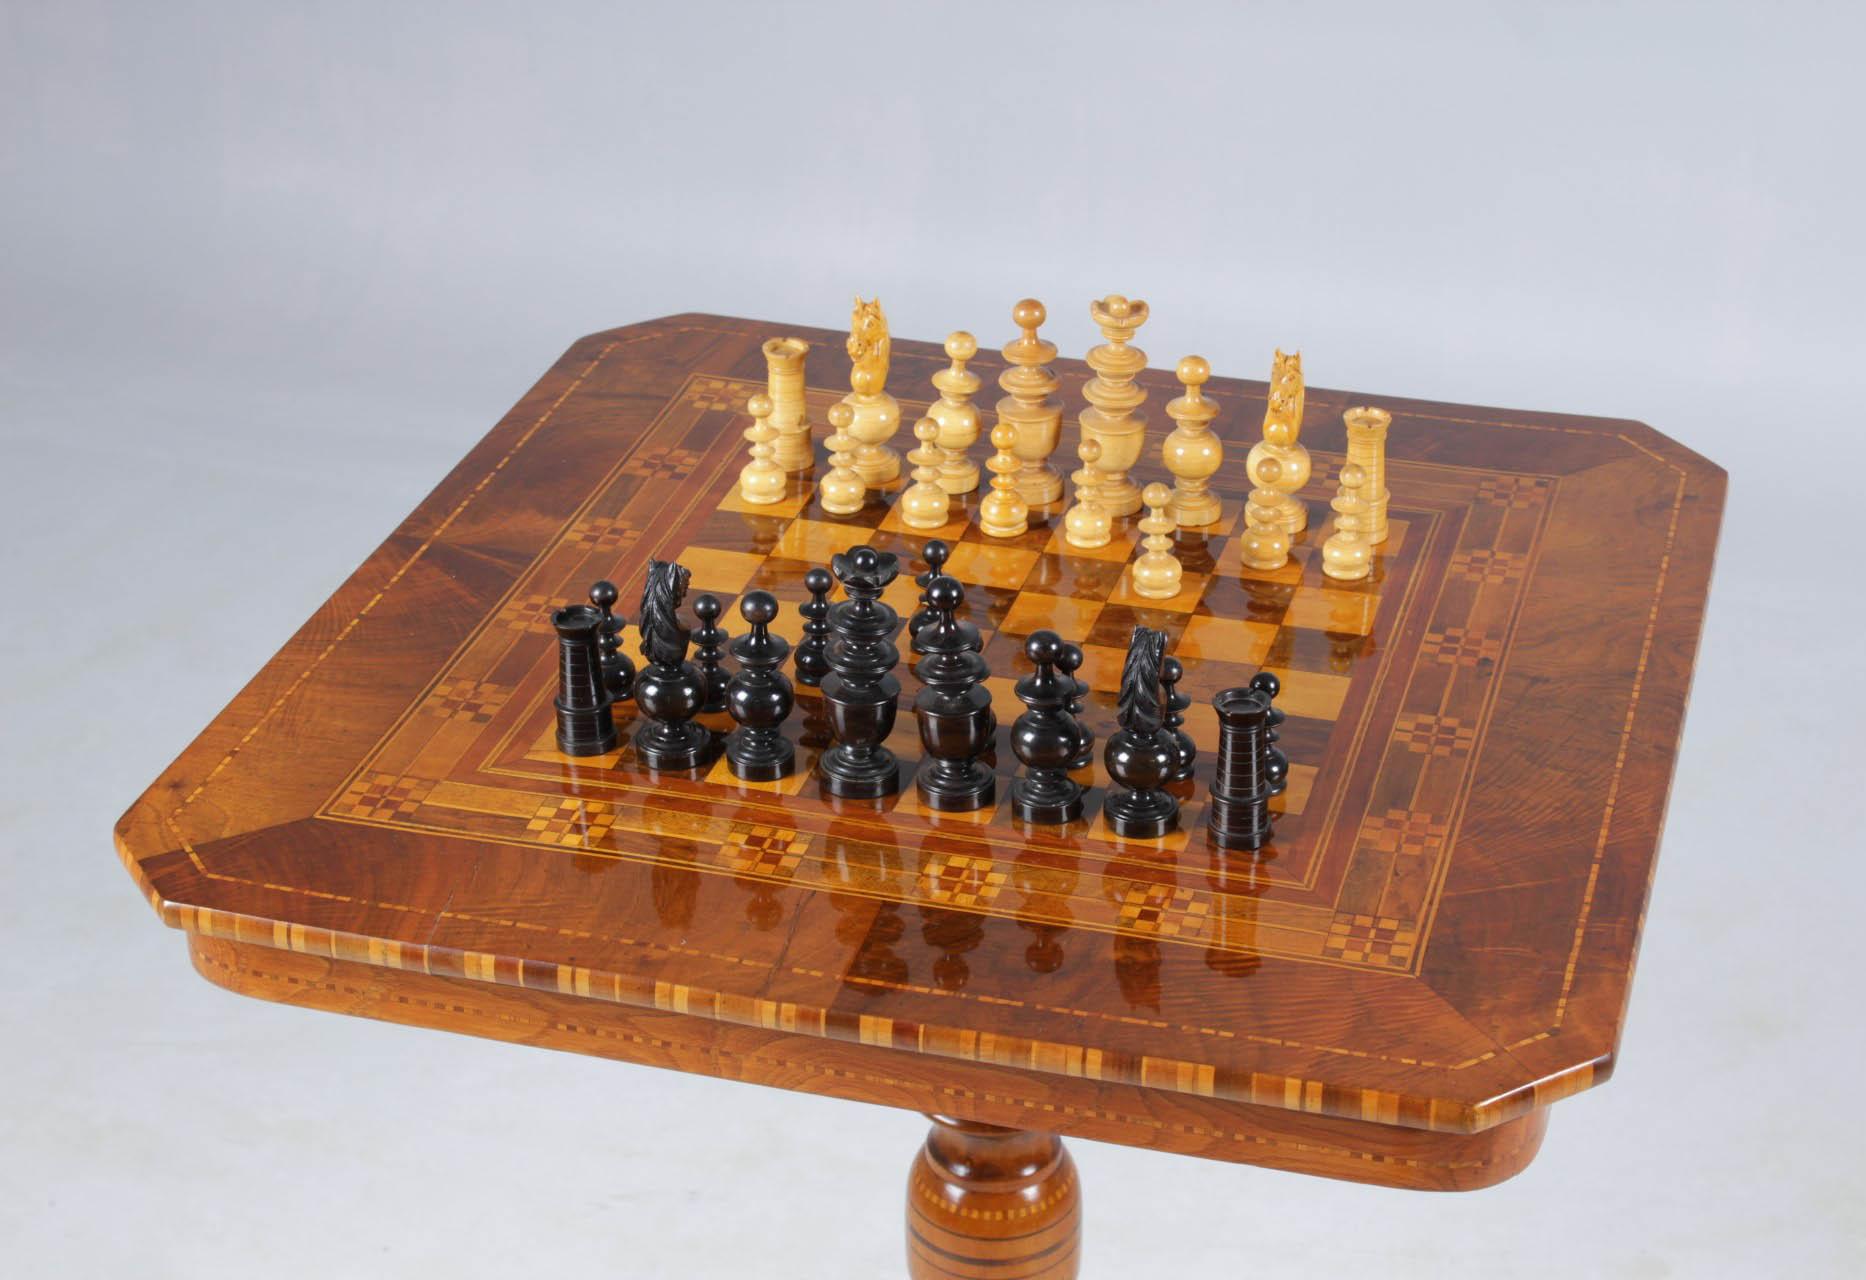 Inlay 19th Century Antique Chess Table, Walnut, Italy circa 1850, Without Chess Pieces